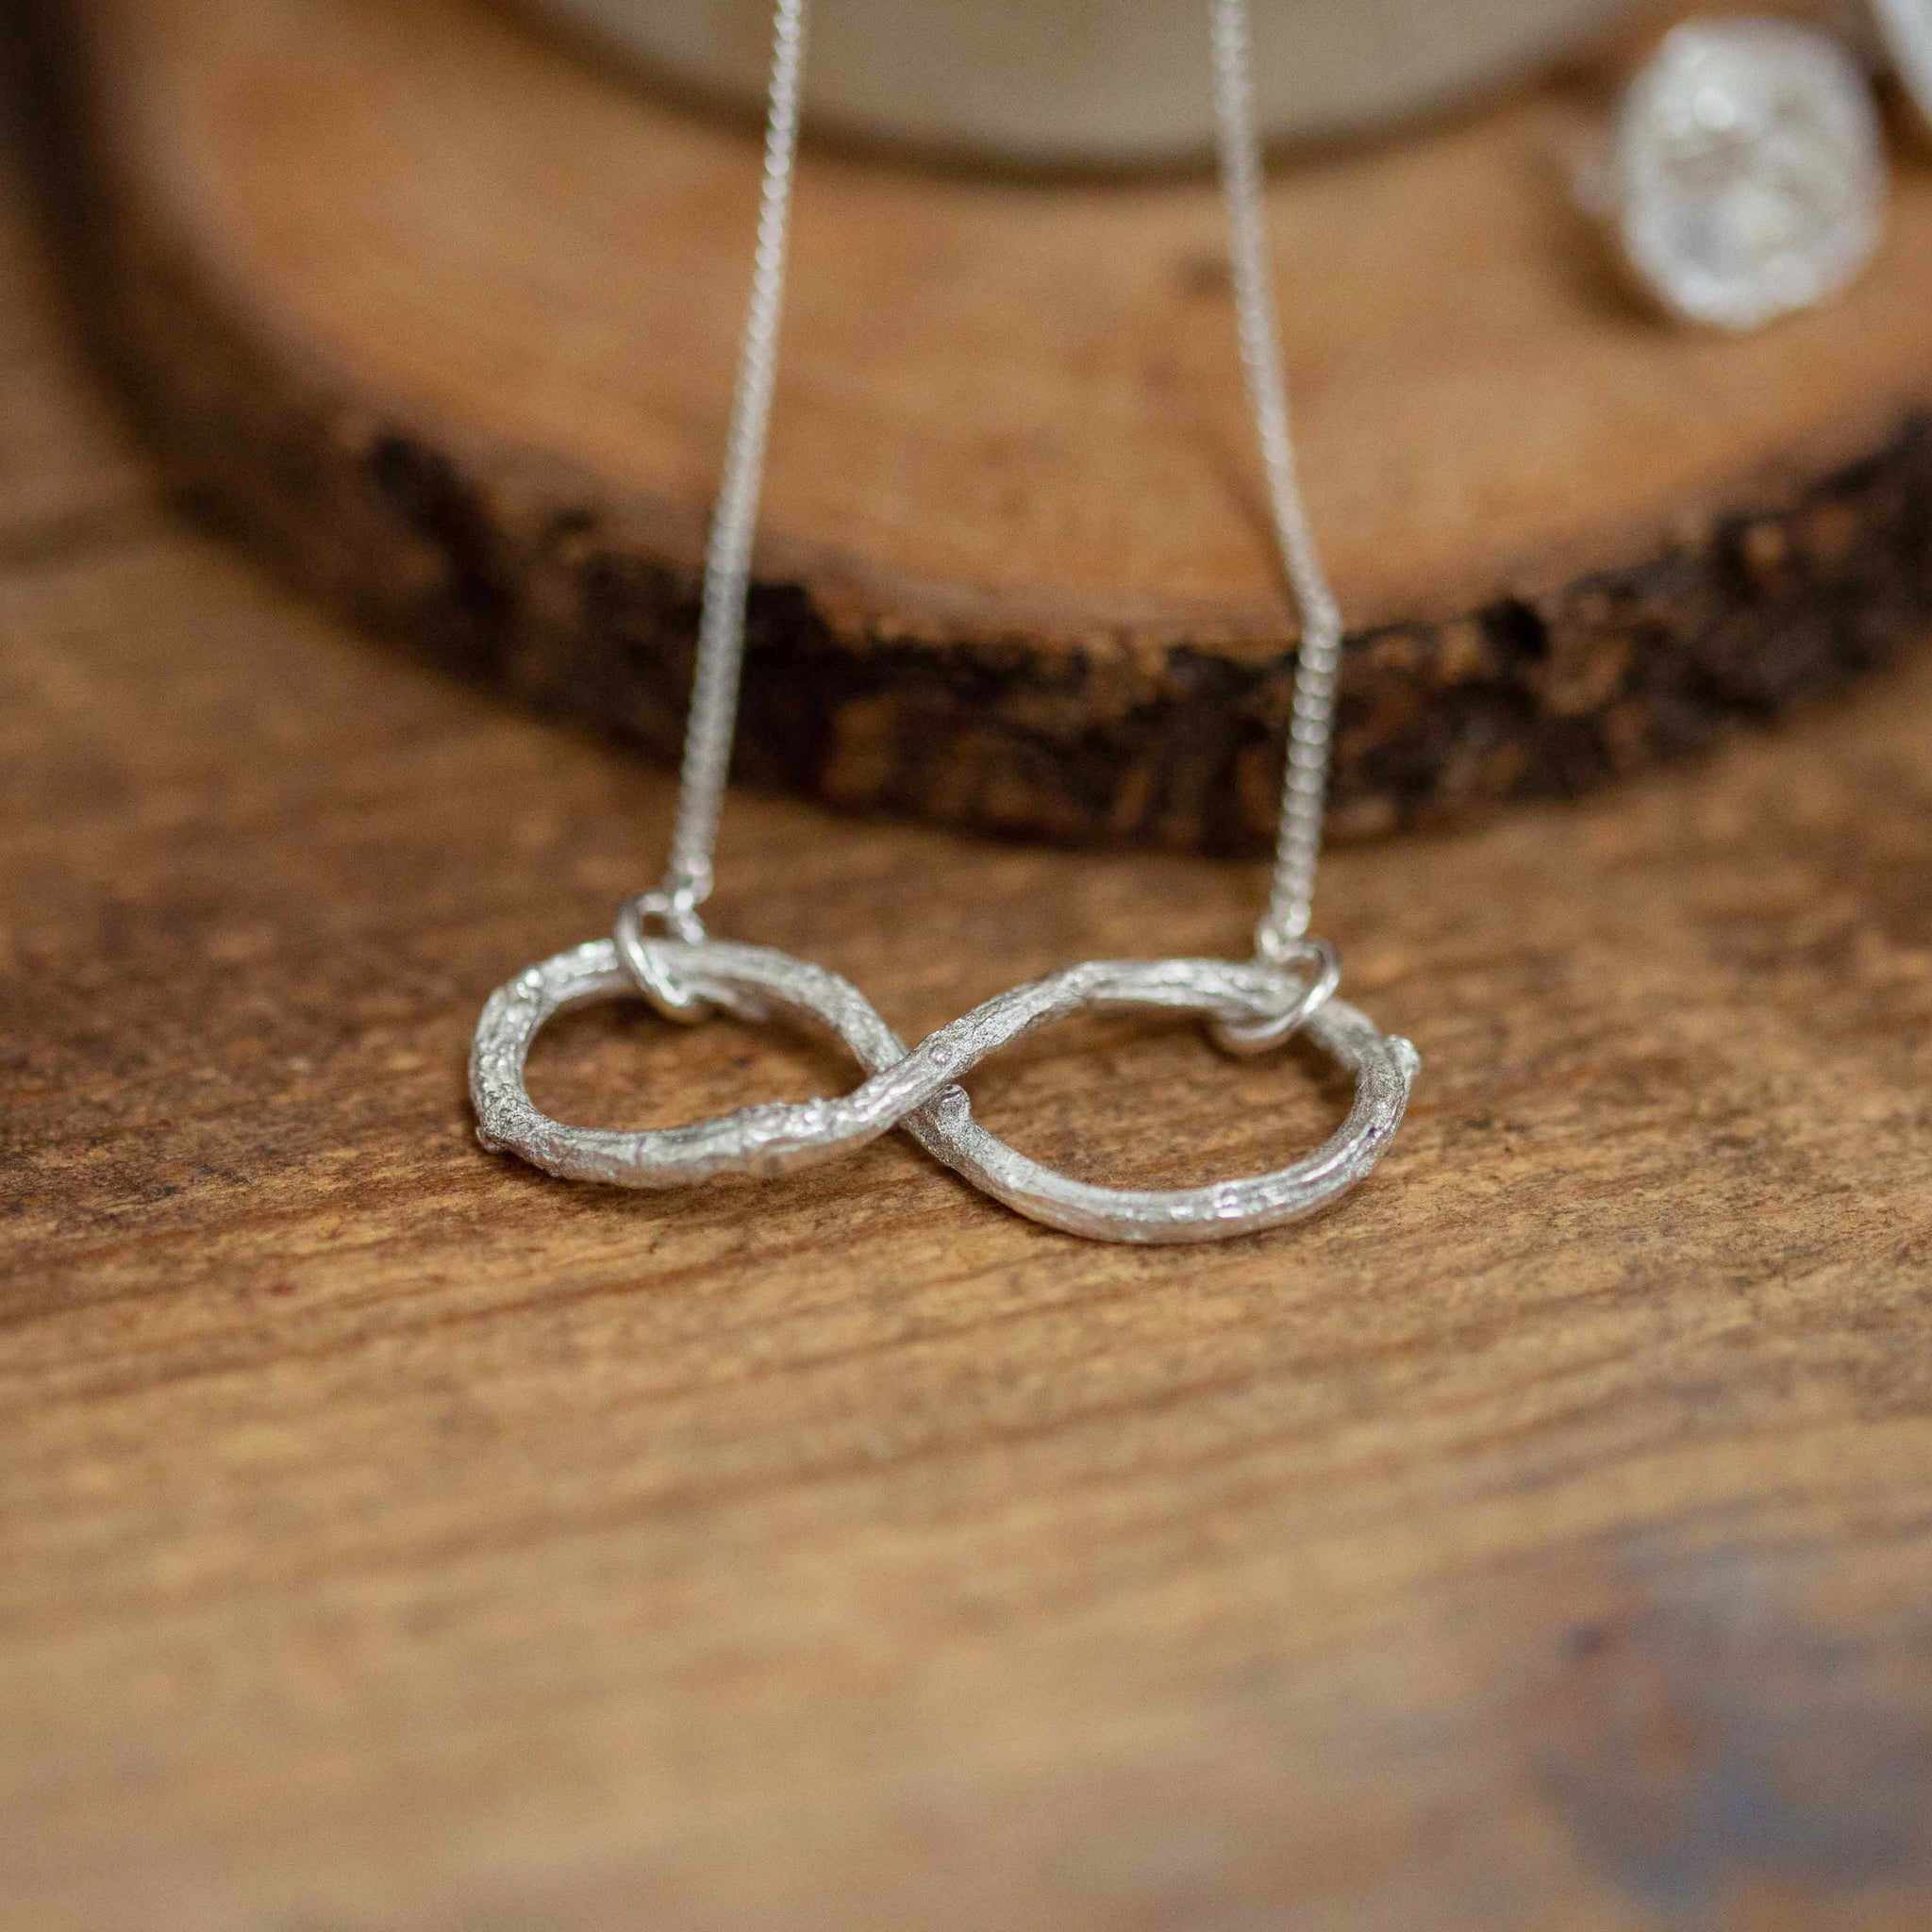 Infinity shape necklace resting on wooden background 